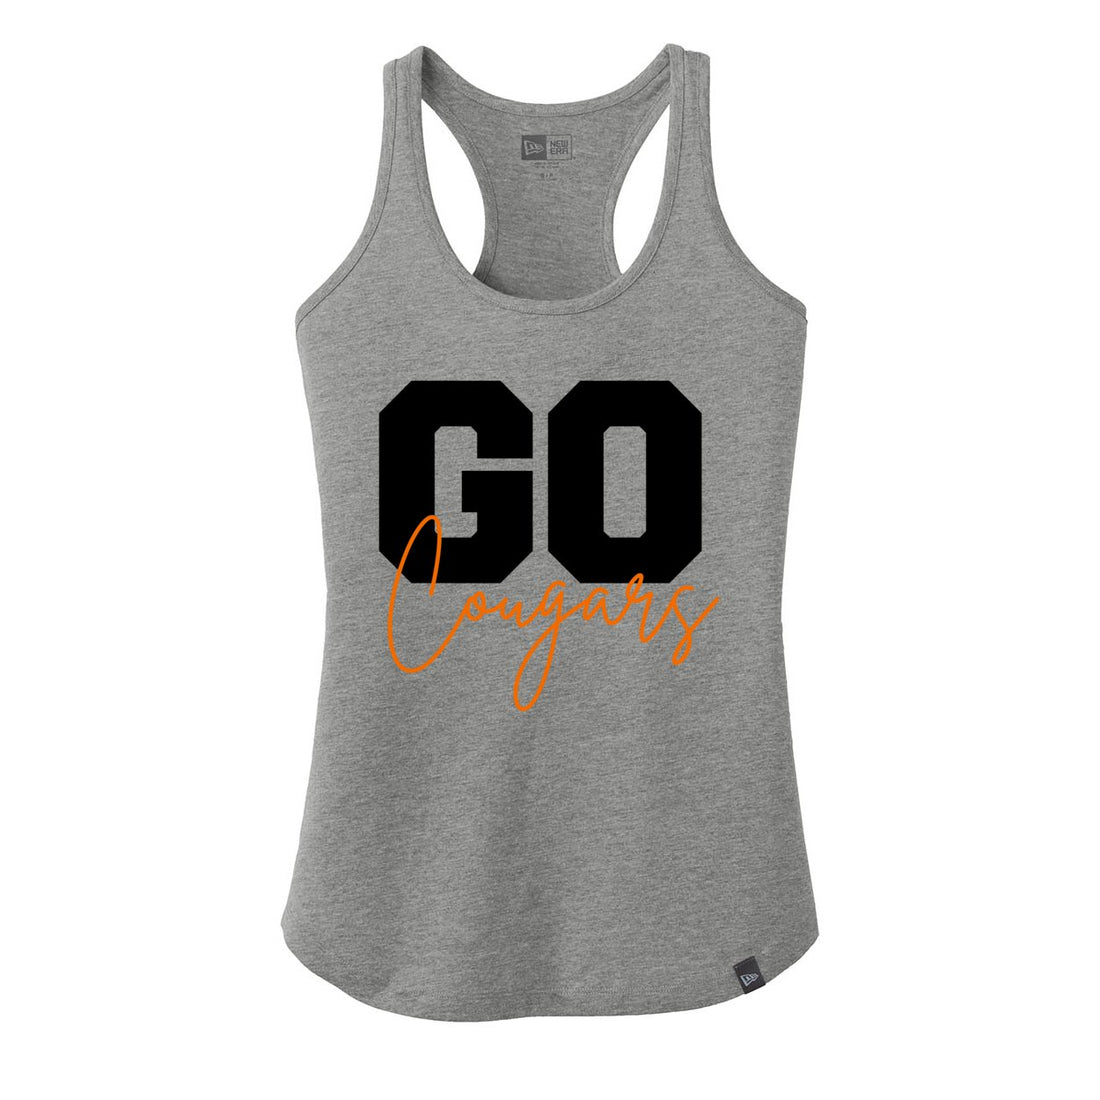 Go Cougars Racerback Tank - Tank Tops - Positively Sassy - Go Cougars Racerback Tank